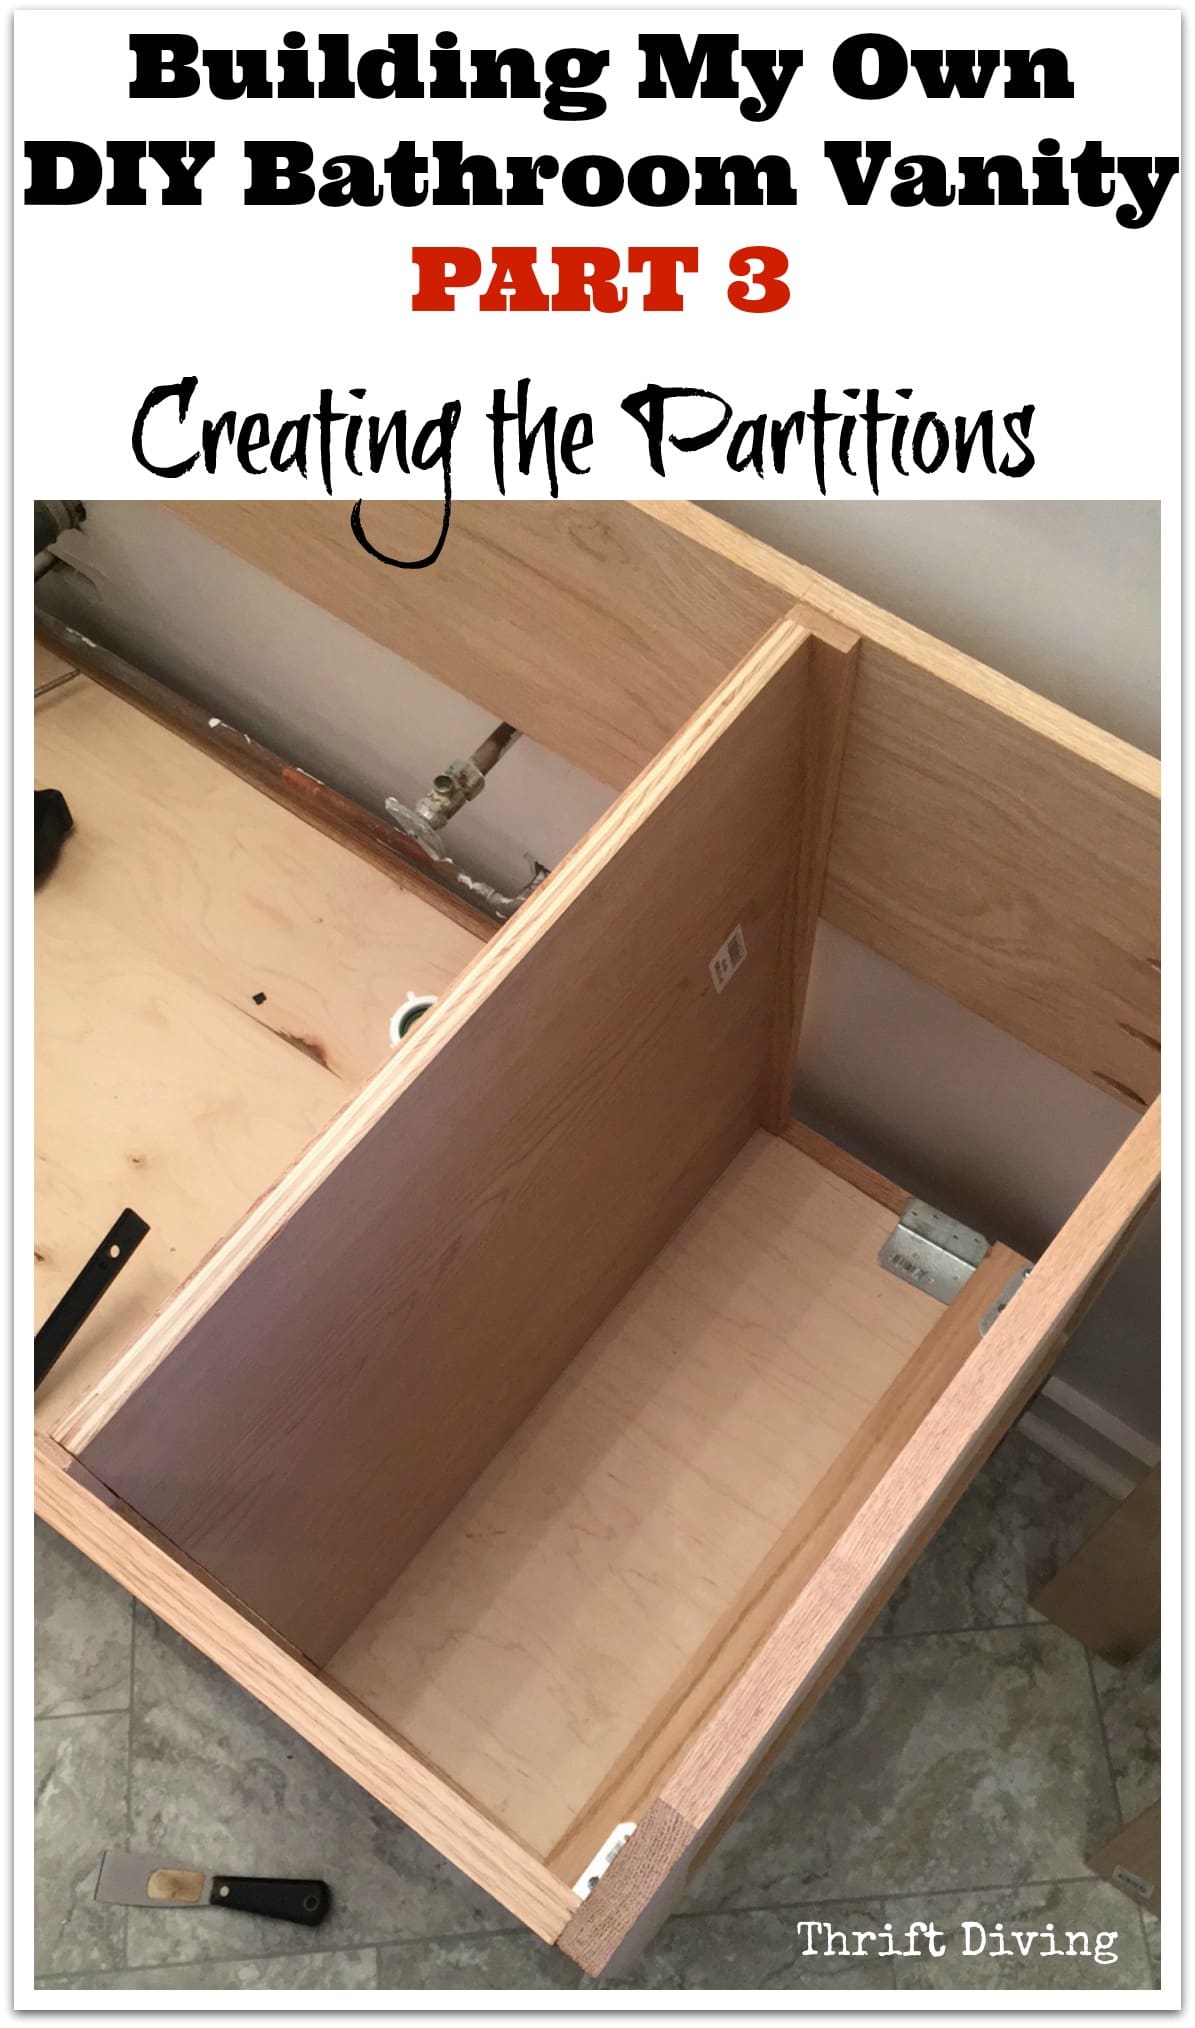 Building My Own DIY Bathroom Vanity - Park 3 - Creating the Partitions to keep the drawers separate from the plumbing area. - Thrift Diving